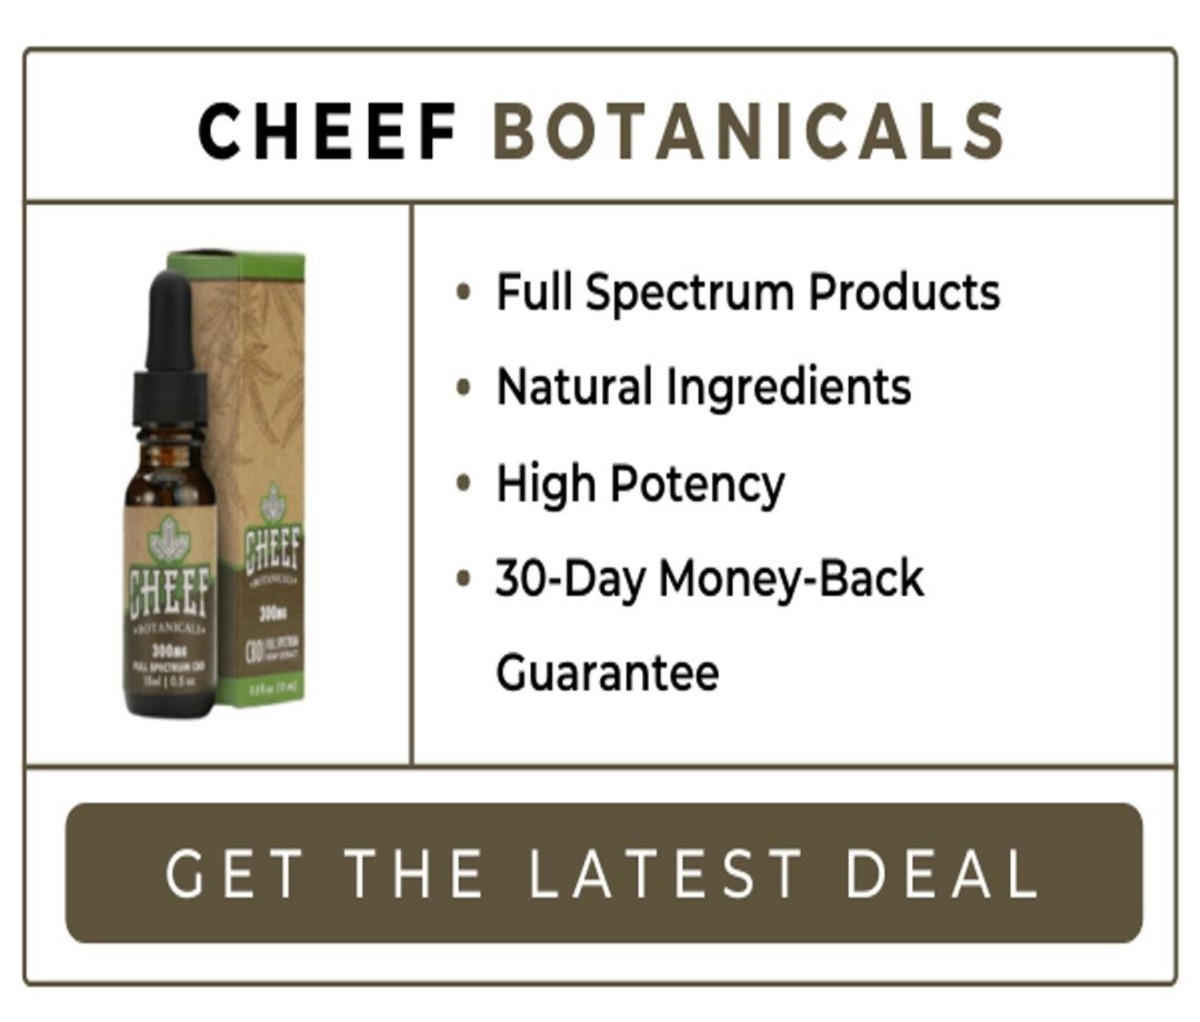 Cheef Botanicals: Highly Effective CBD Tincture For Relaxation